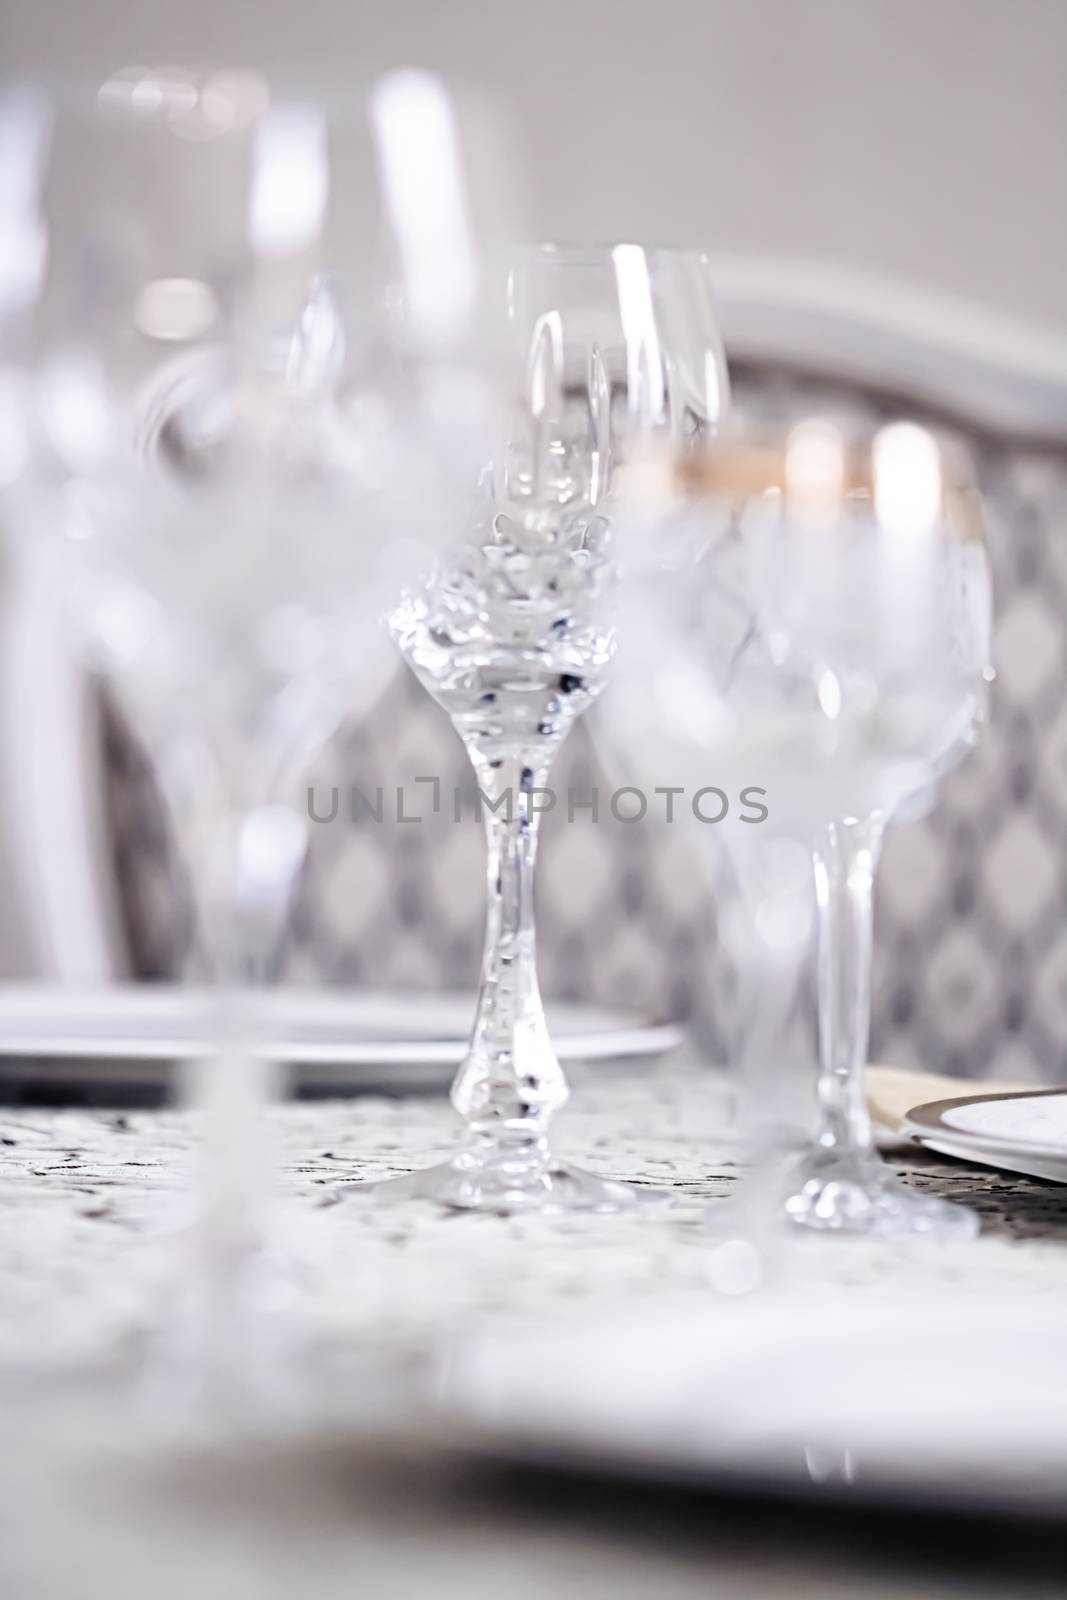 Crystal glasses as luxury table glassware and bohemian glass design, home decor and event decorations